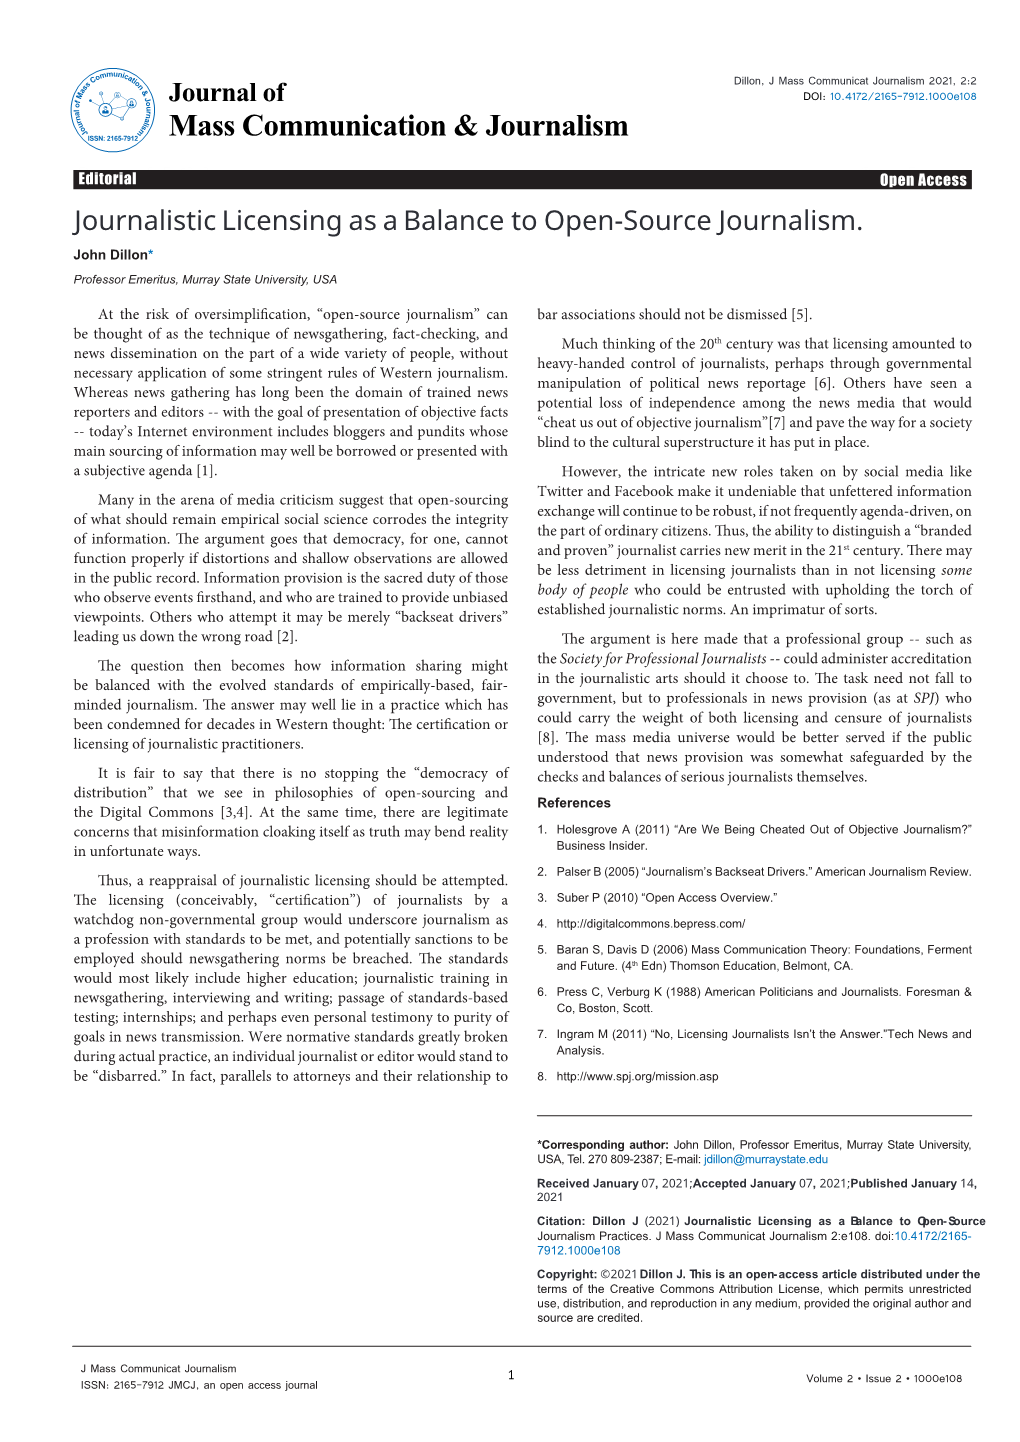 Journalistic Licensing As a Balance to Open-Source Journalism Practices